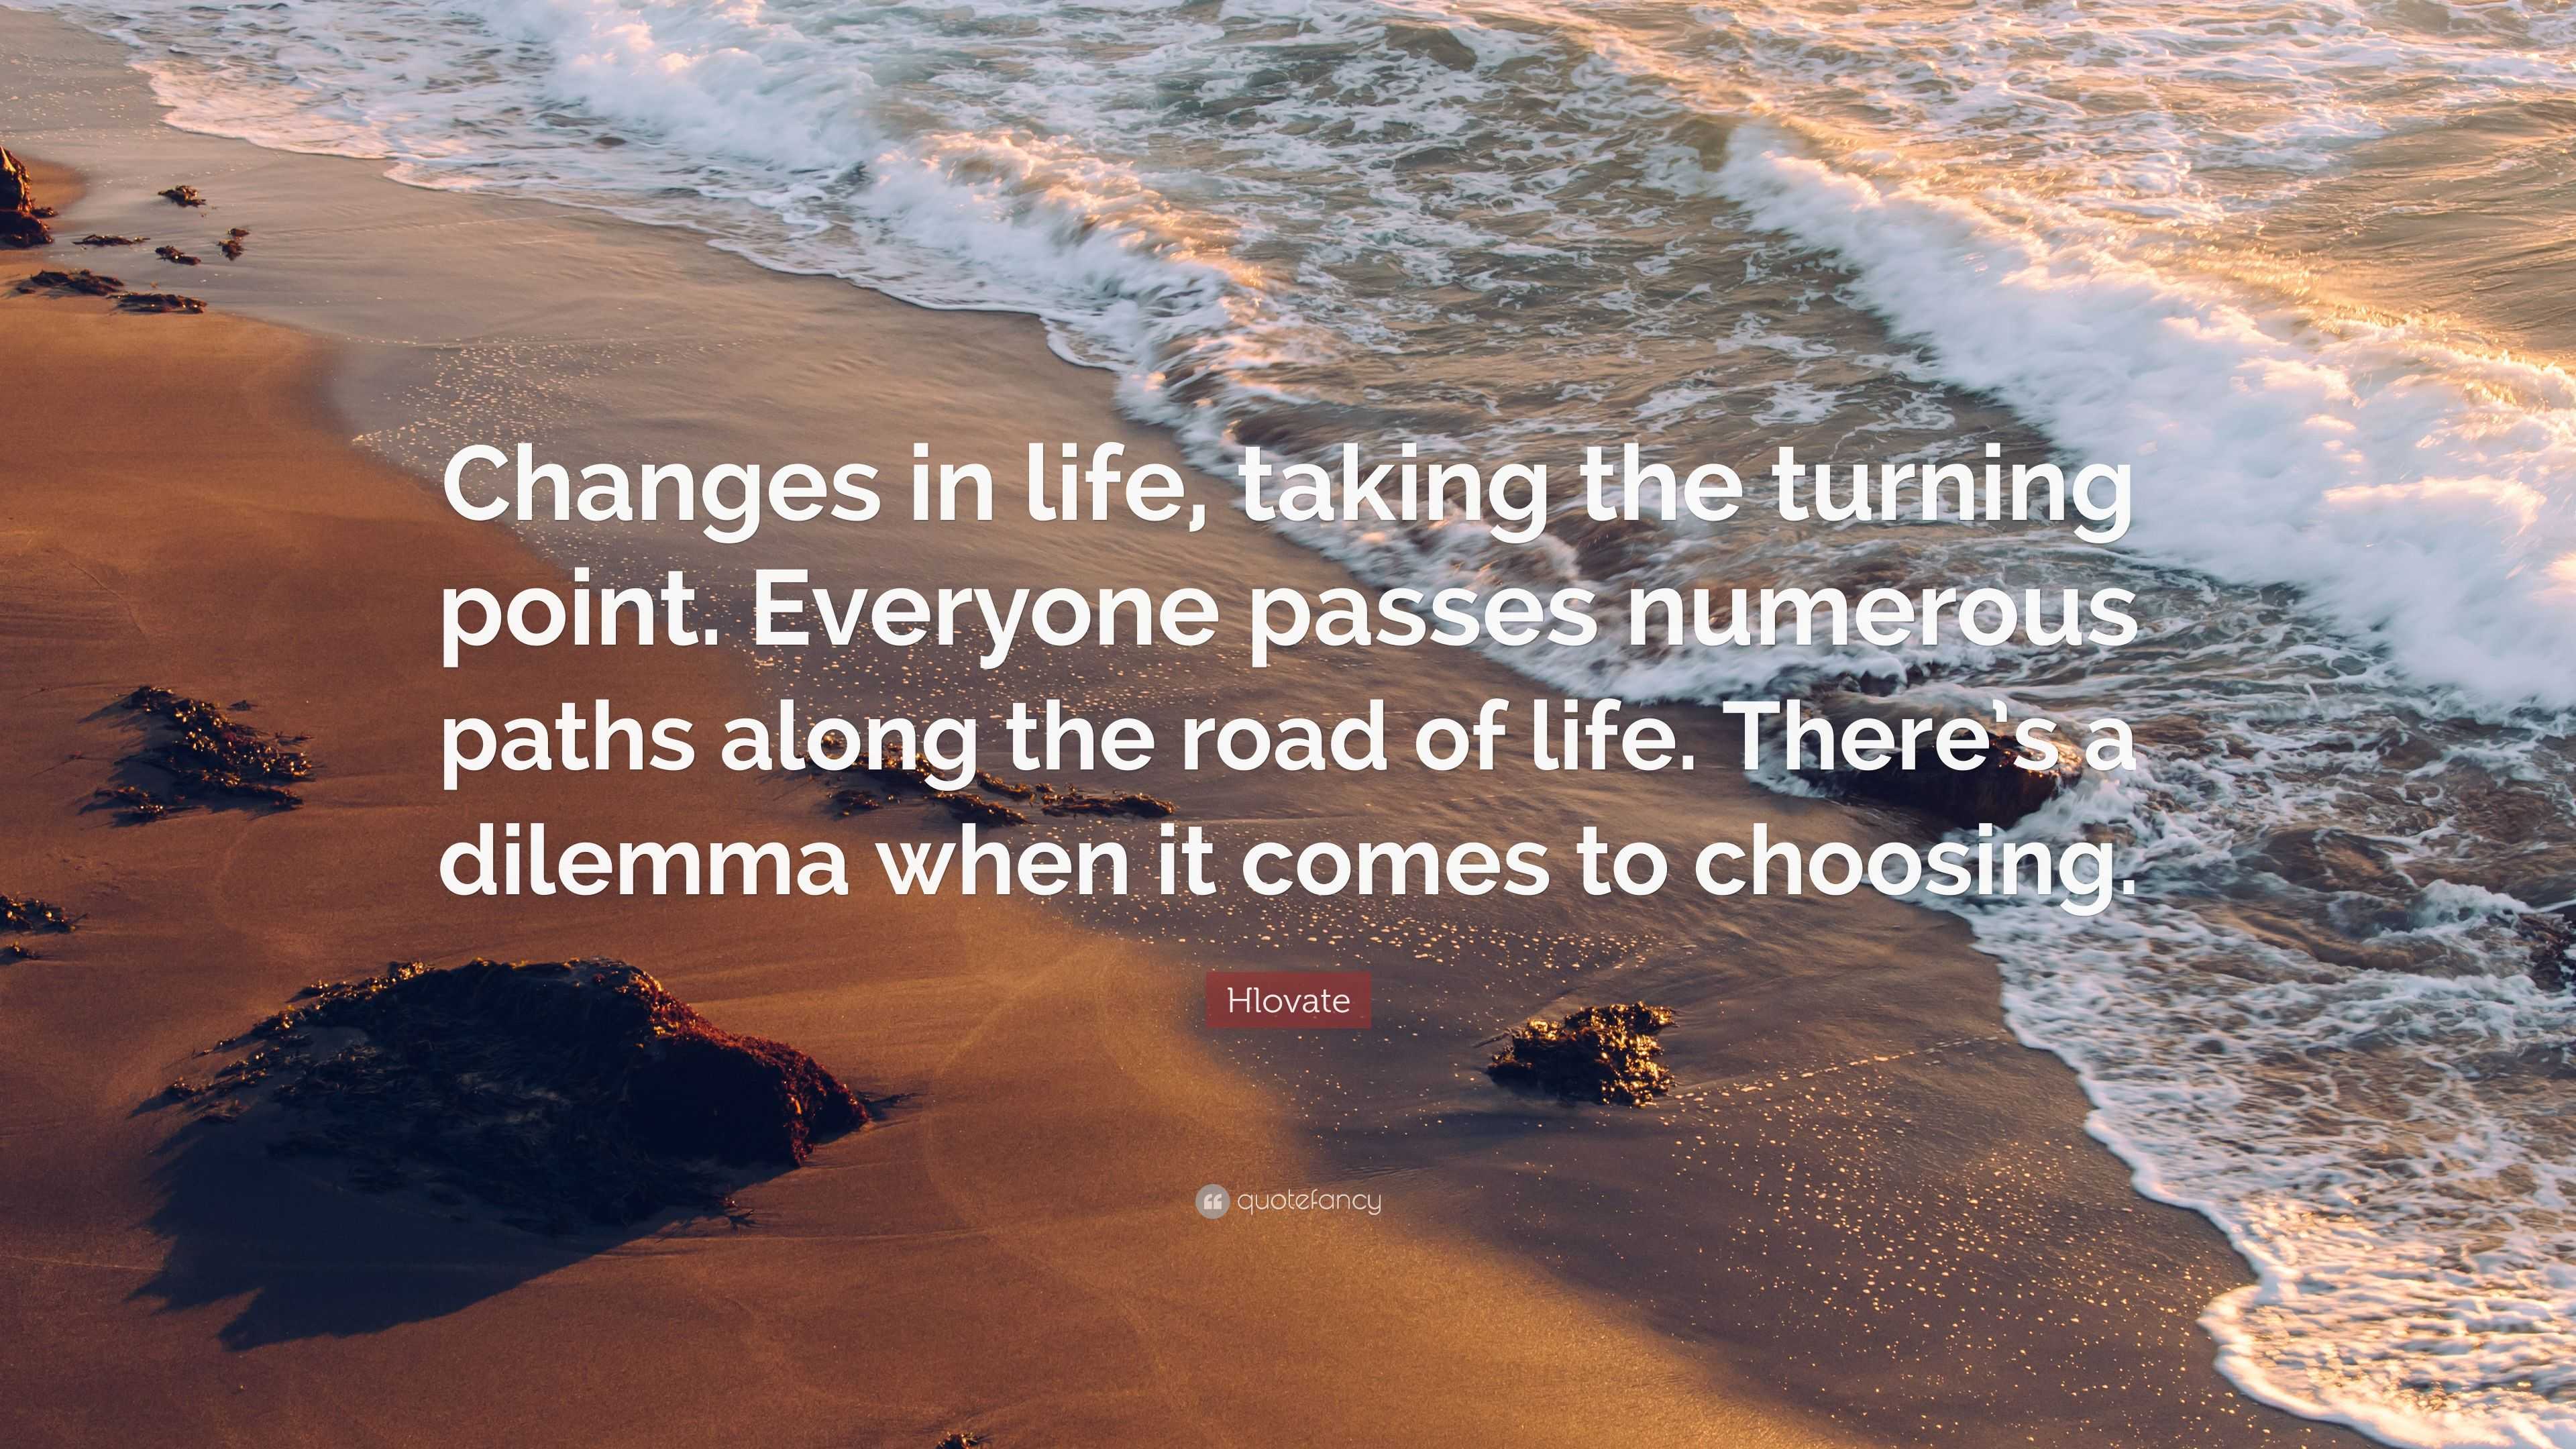 Hlovate Quote: "Changes in life, taking the turning point. Everyone passes numerous paths along ...